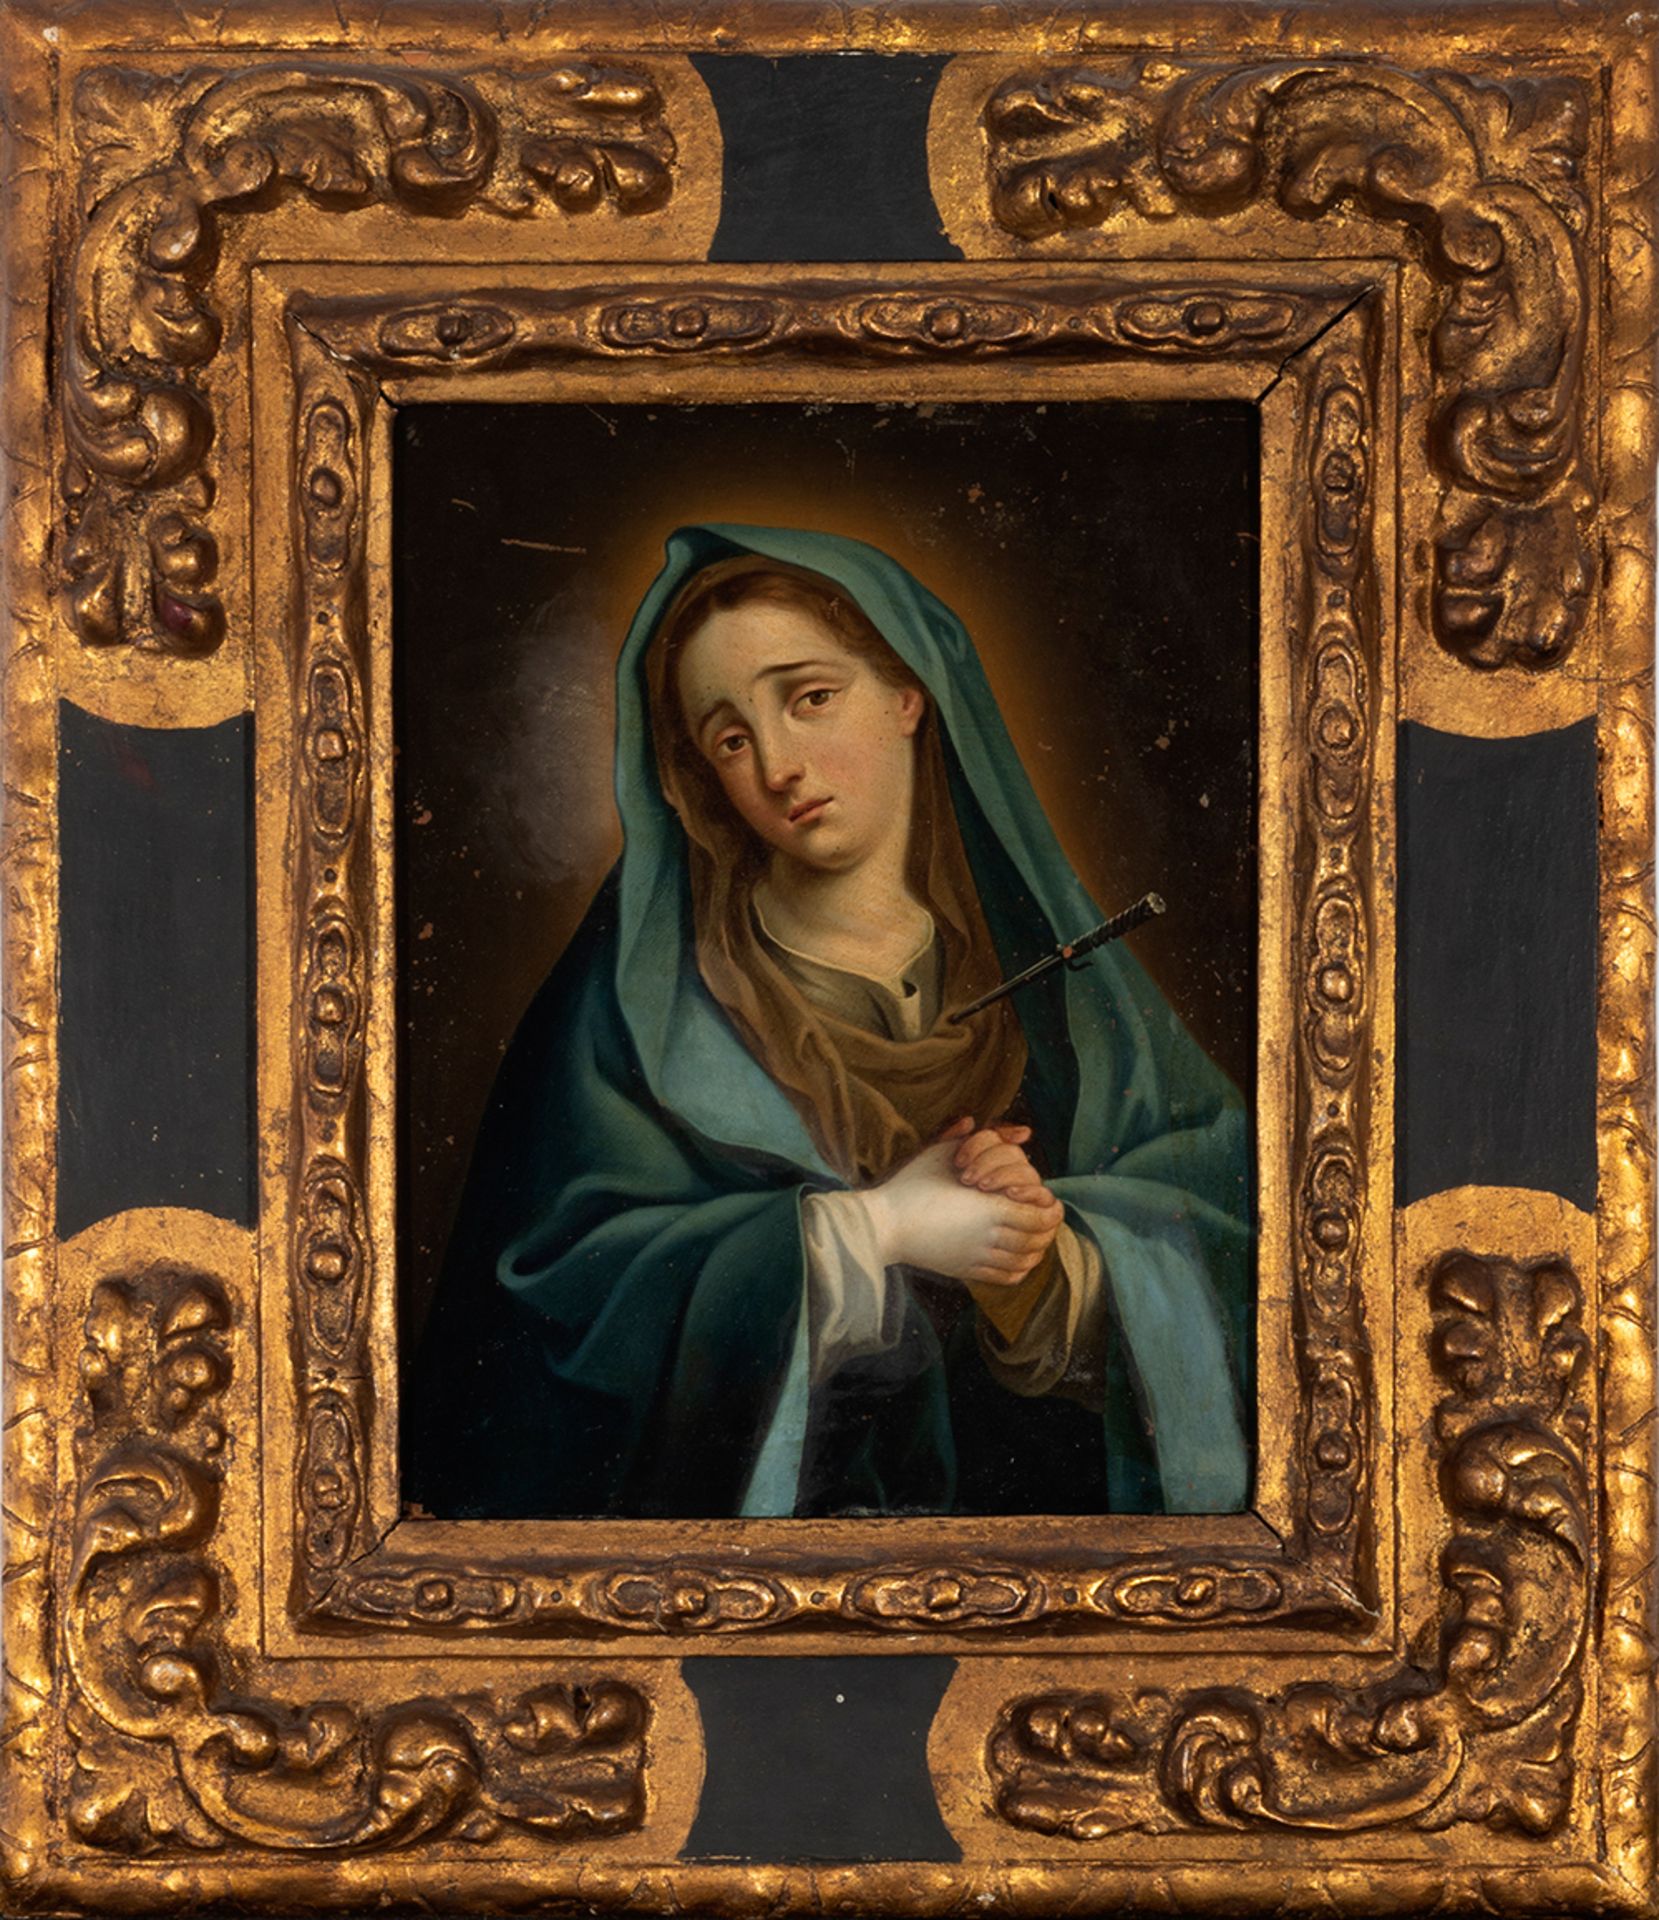 Attributed to Andrés López (Mexico, 1763-1811). 